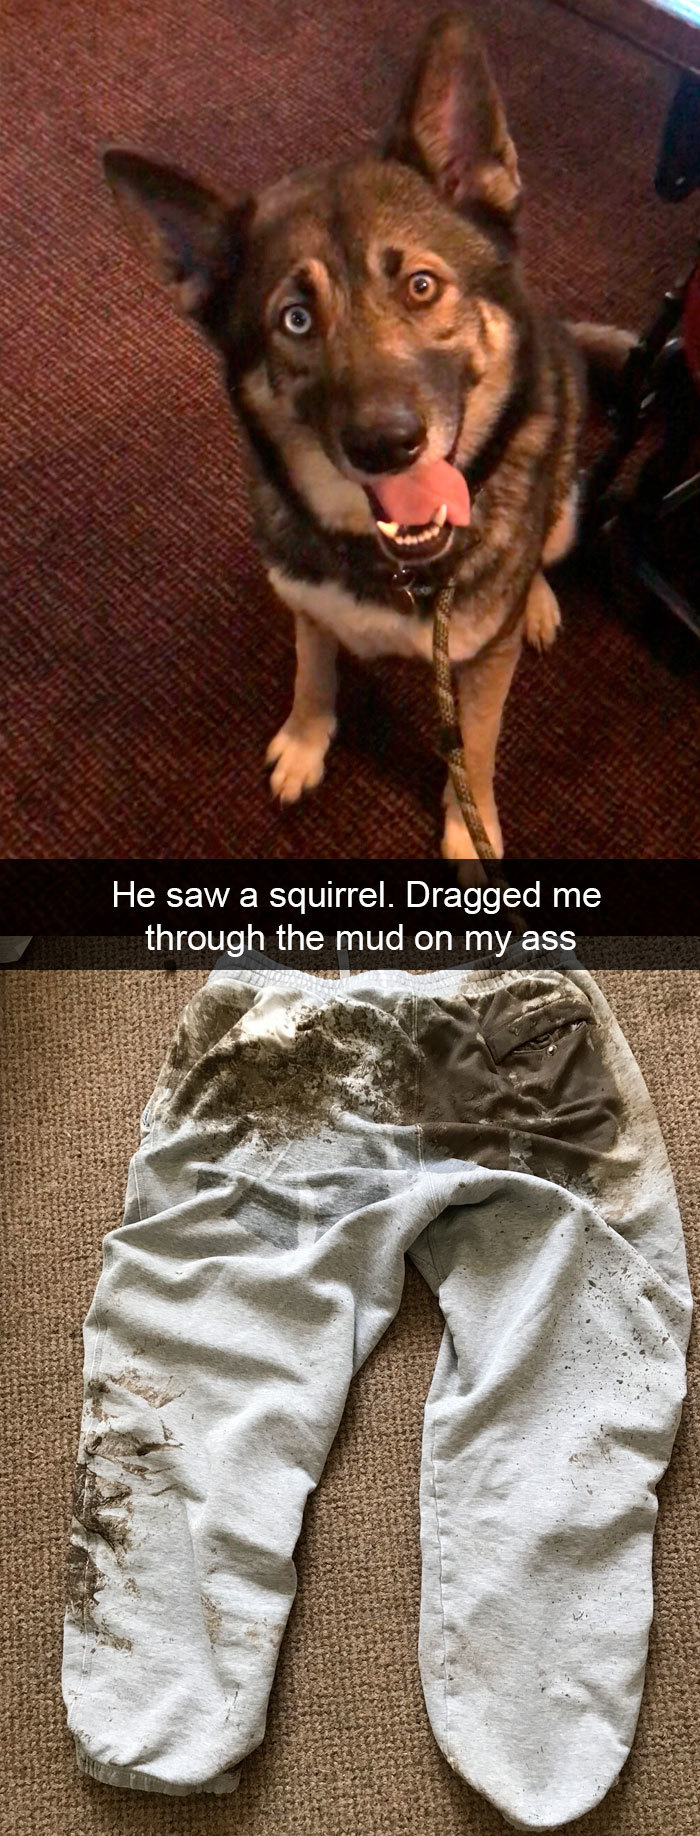 funny having a bad day - He saw a squirrel. Dragged me through the mud on my ass